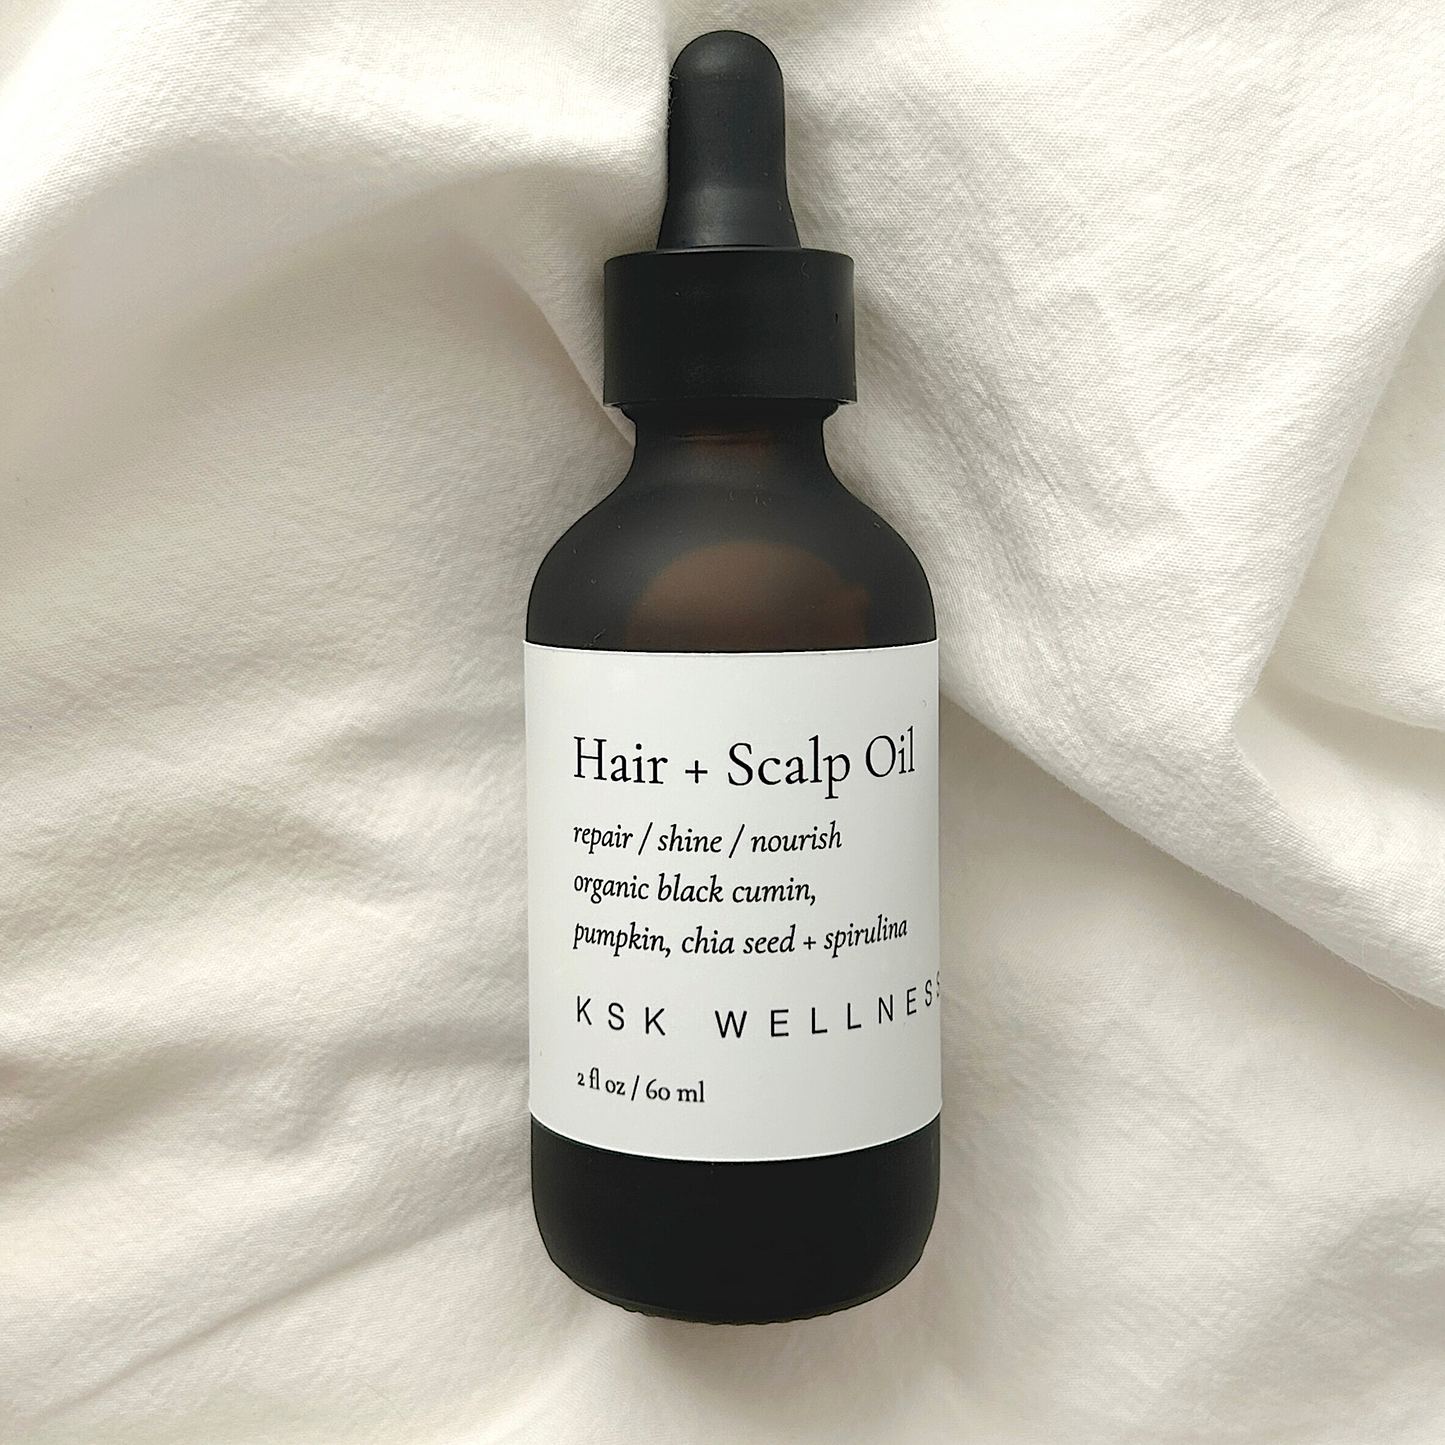 Nourishing hair + scalp oil for all hair types with a blend of argan oil, marula oil and chia seed oil. Handcrafted with a blend of organic fair trade botanical oils is high in antioxidants, essential fatty acids, and amino acids that is effective at relieving dry itchy scalp, keeping hair shiny, soft, supple, and moisturized.